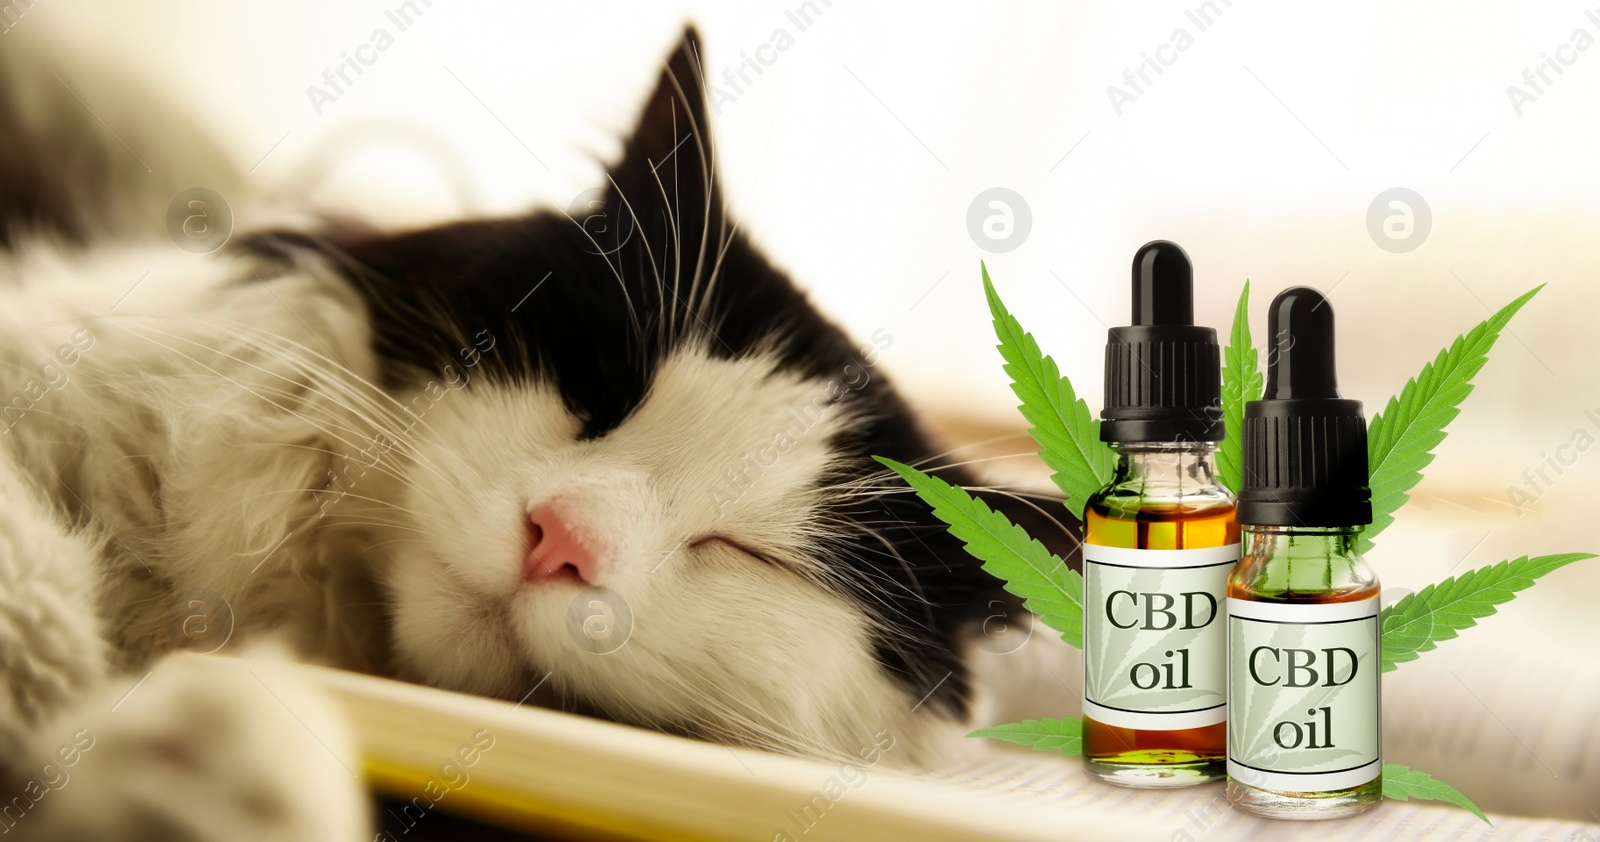 Image of Bottles of CBD oil and cute cat sleeping on open book, closeup